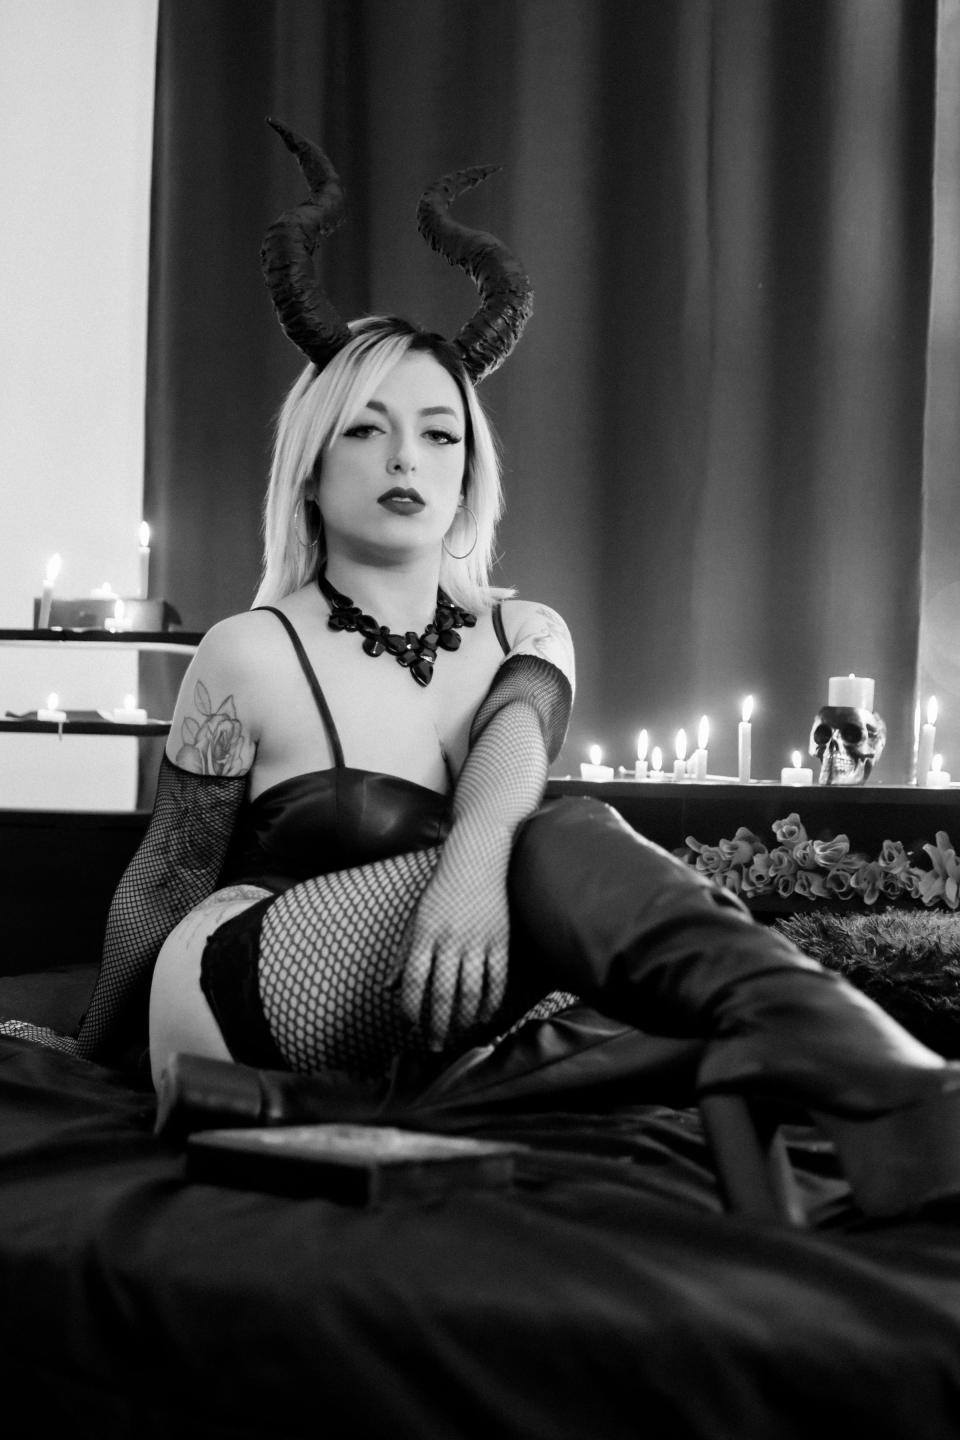 Wanna meet the devil in person? This sexy blonde is all about rough and being a Dominatrix. Are you the submissive type? Check her out!